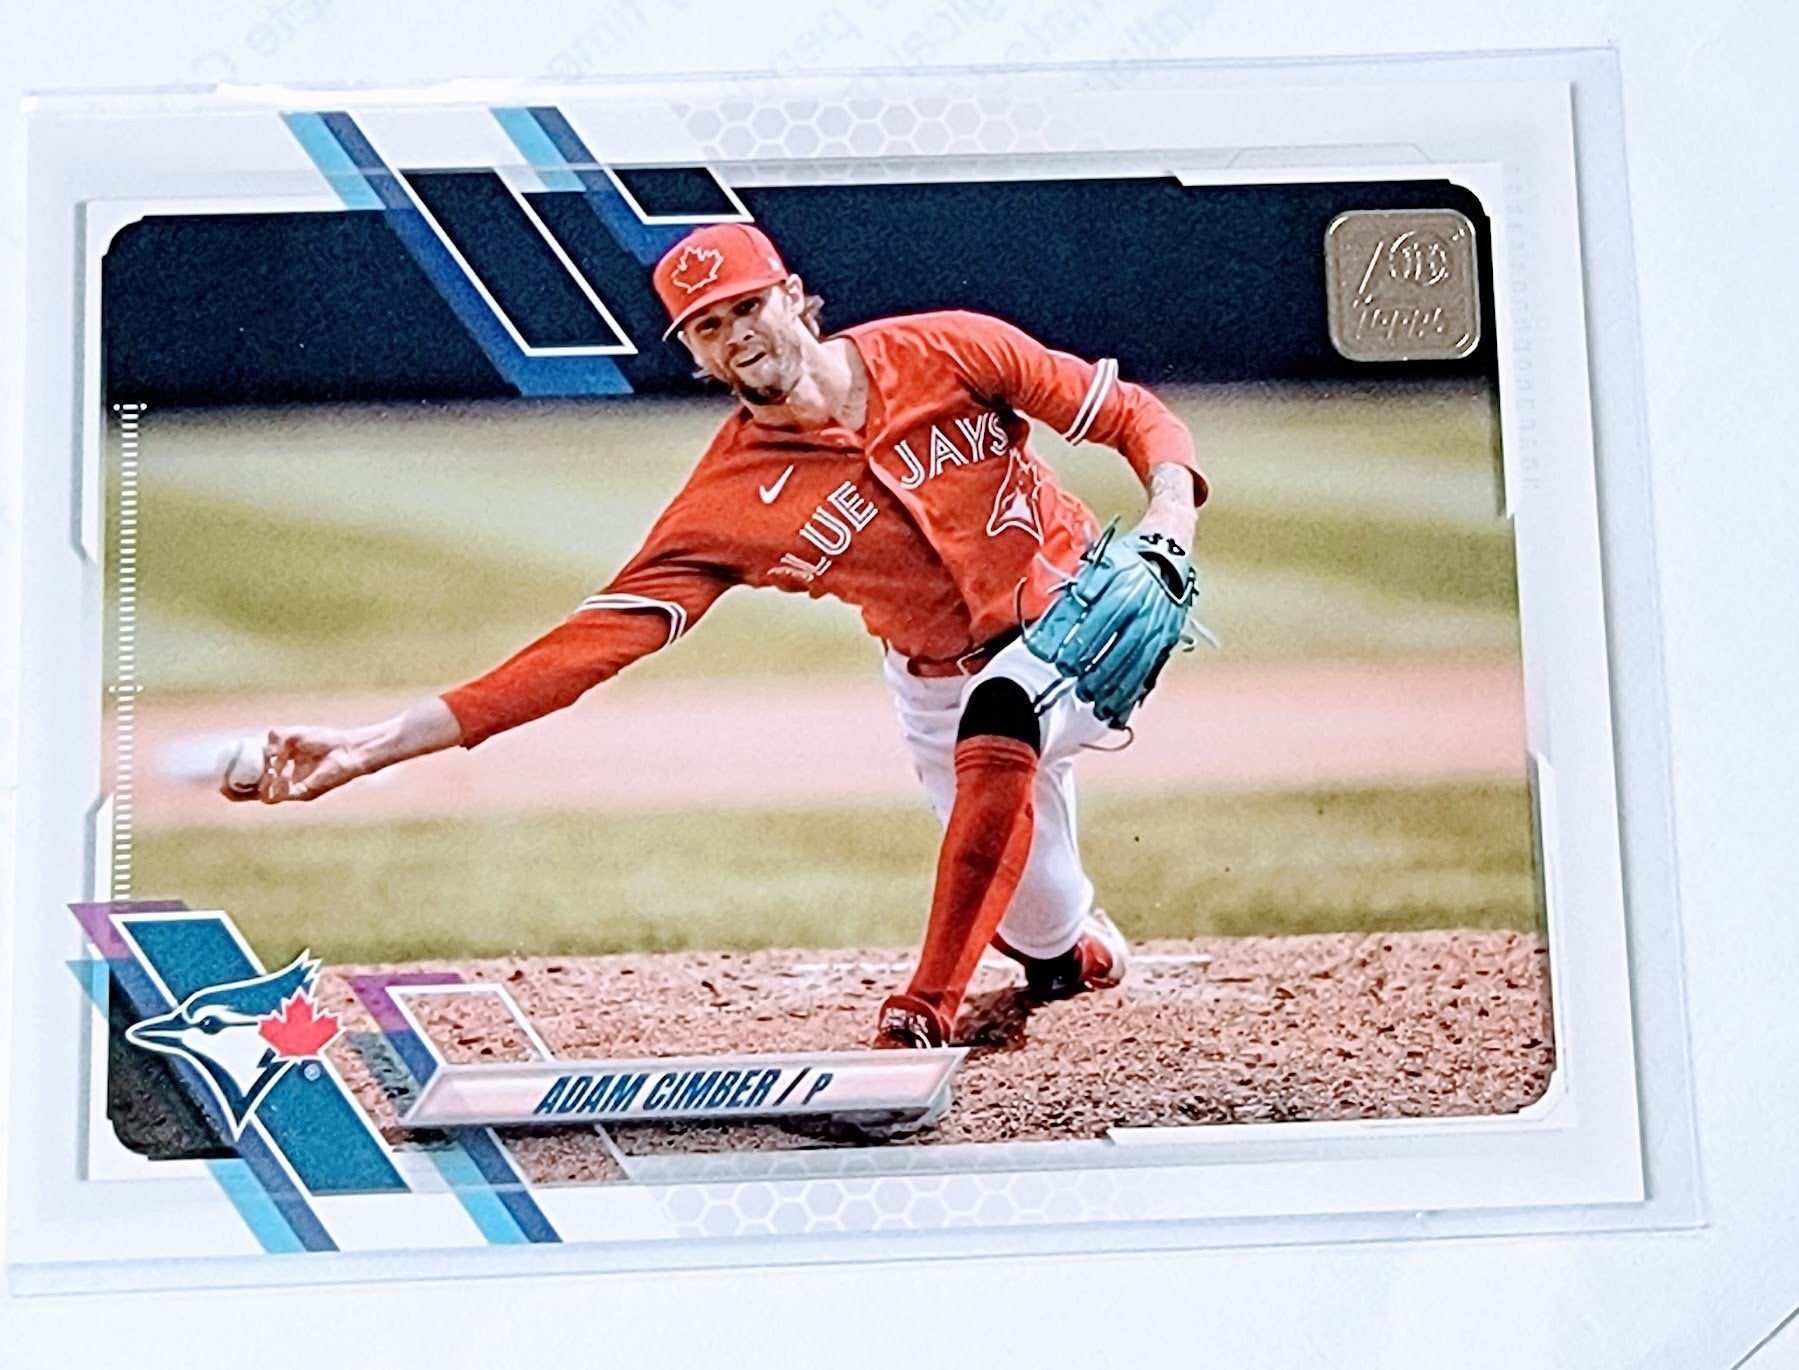 2021 Topps Update Adam Cimber Baseball Trading Card SMCB1 simple Xclusive Collectibles   